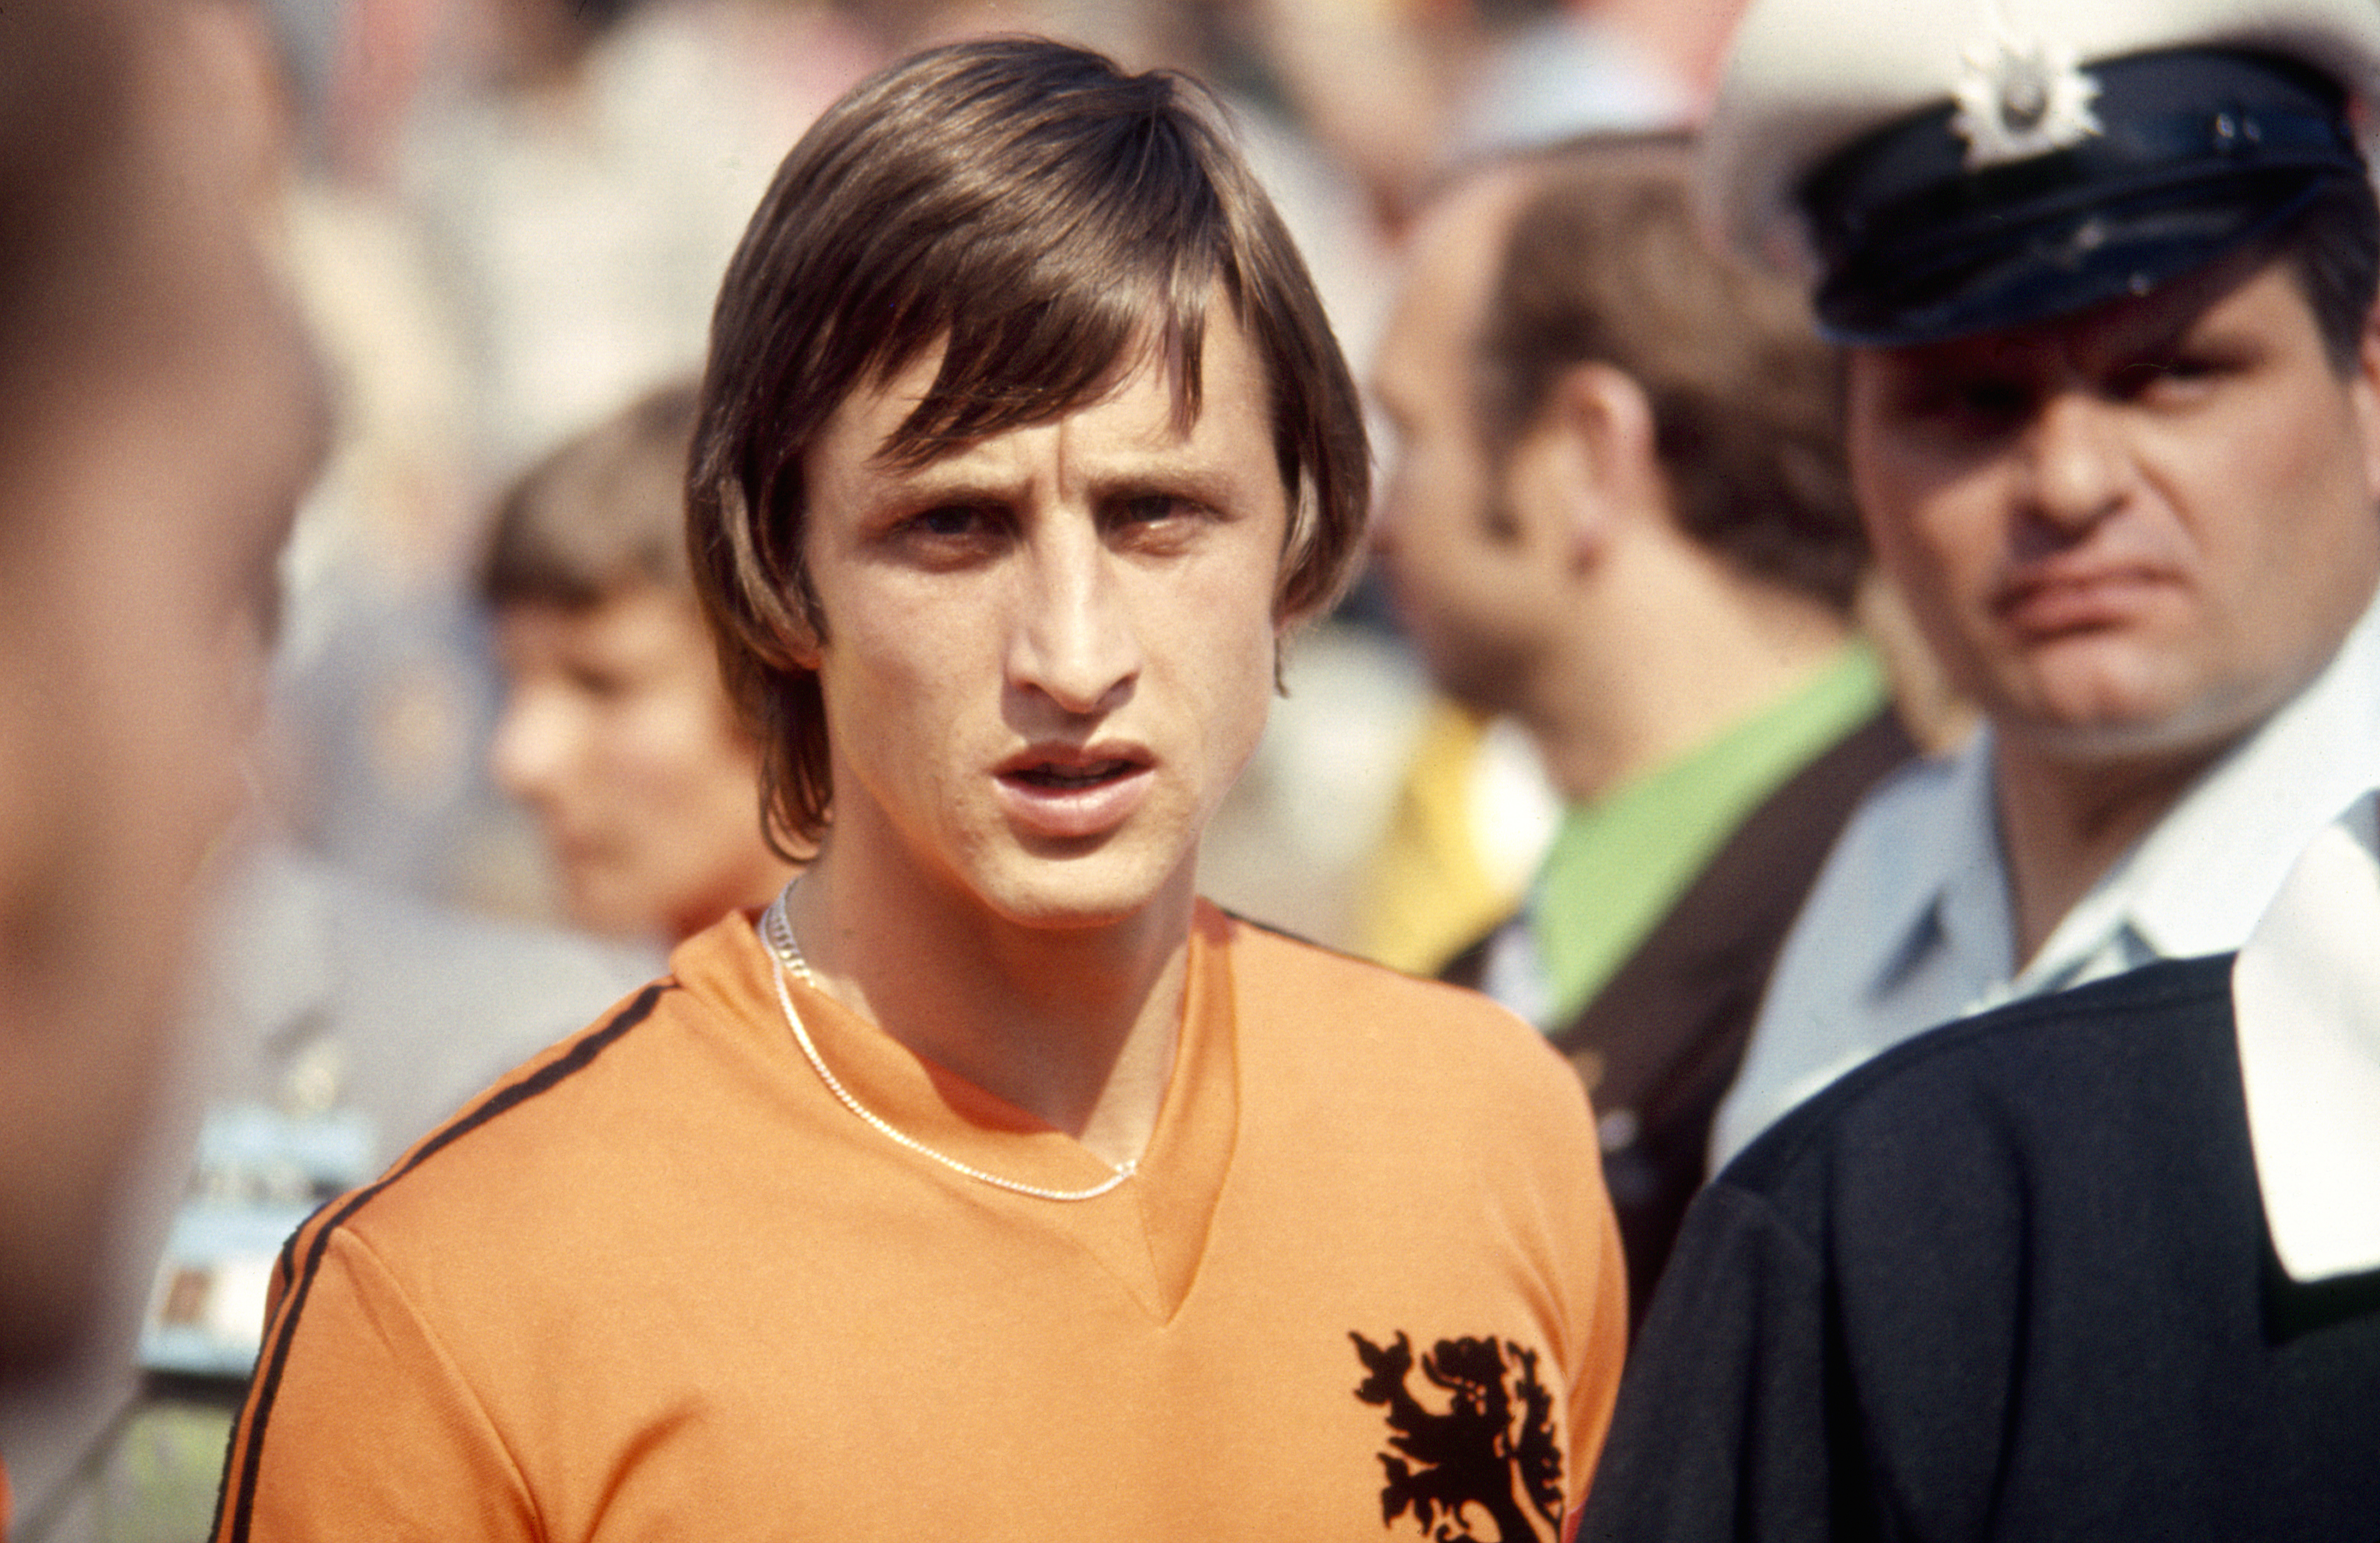 Dutch footballer Johan Cruyff at the World Cup football competition in West Germany, June-July 1974.  (Photo by Getty Images)